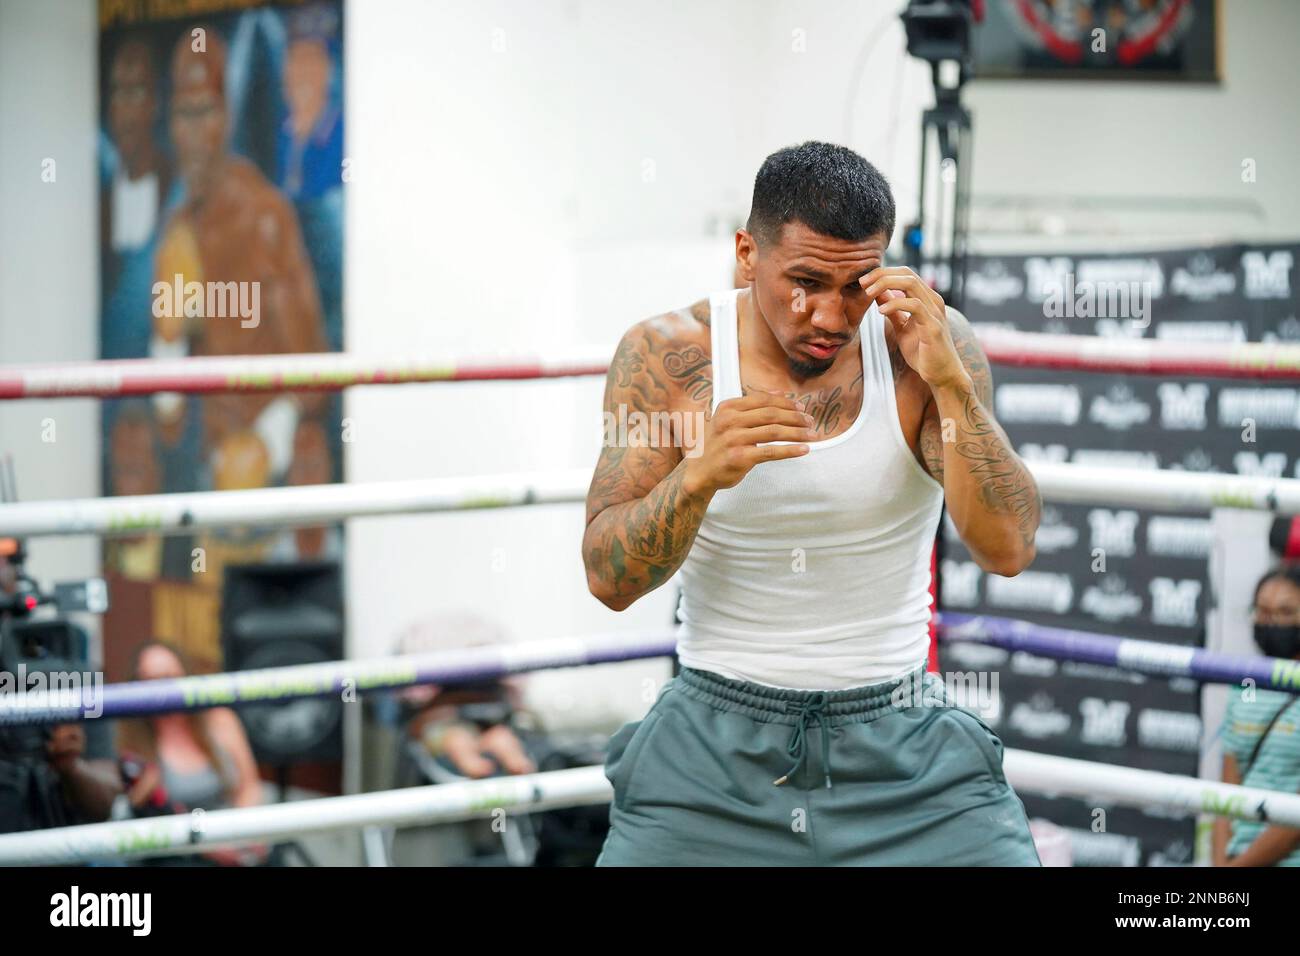 LAS VEGAS, NV - MAY 18: Luis Arias shows off his skills in the ring for the  media workout at the Floyd Mayweather vs Logan Paul Media Event at  Mayweather Boxing Gym